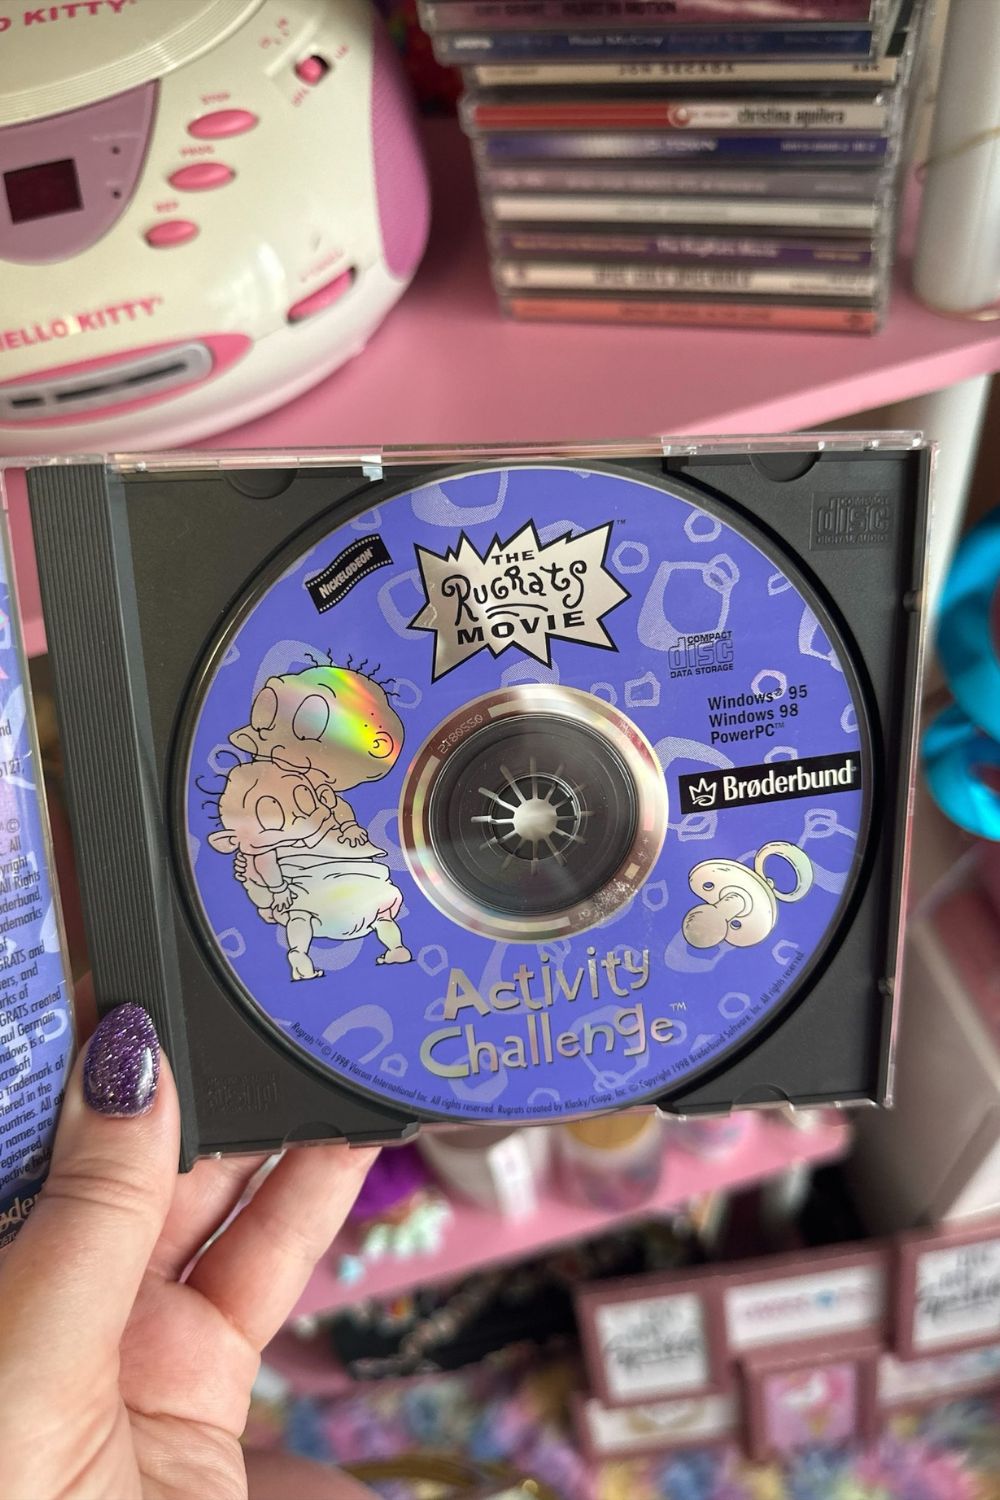 THE RUGRATS MOVIE ACTIVITY CHALLENGE CD-ROM*